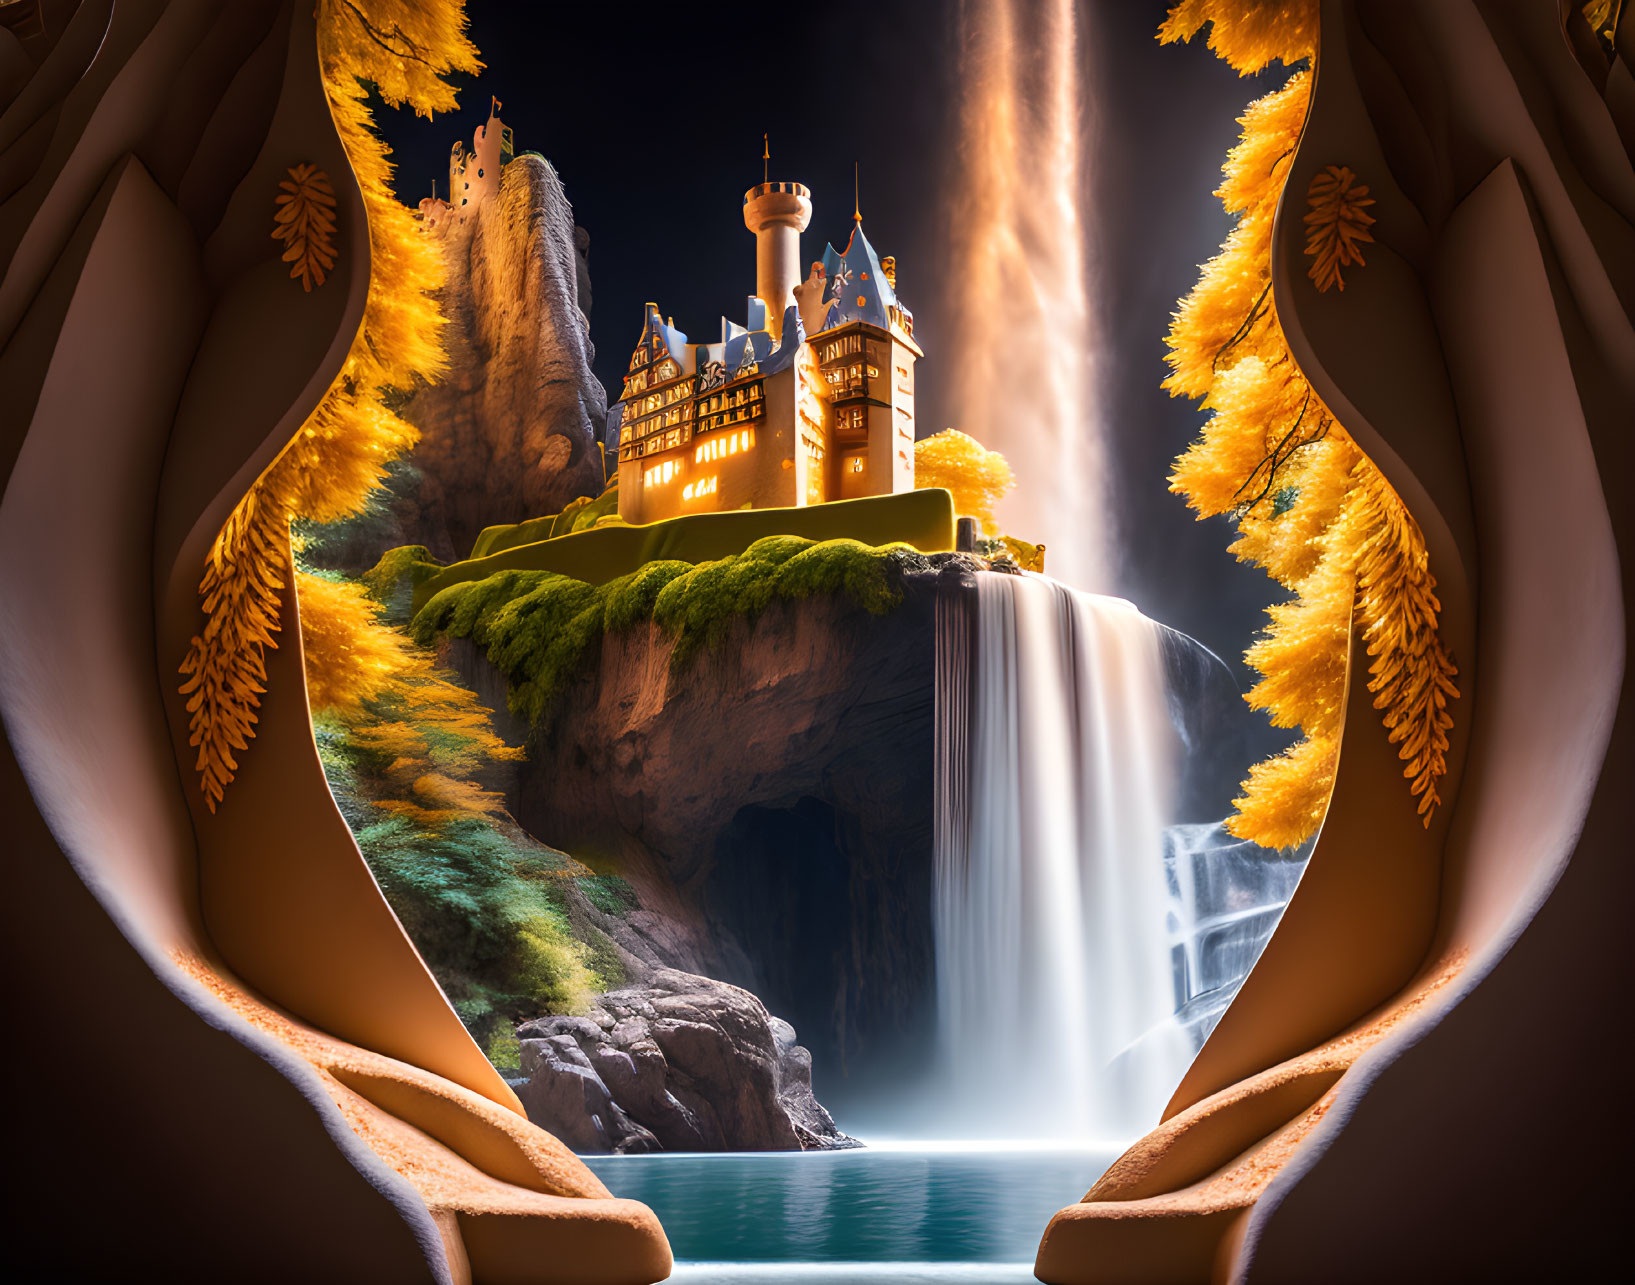 Enchanting castle on cliff with waterfall and autumnal scenery